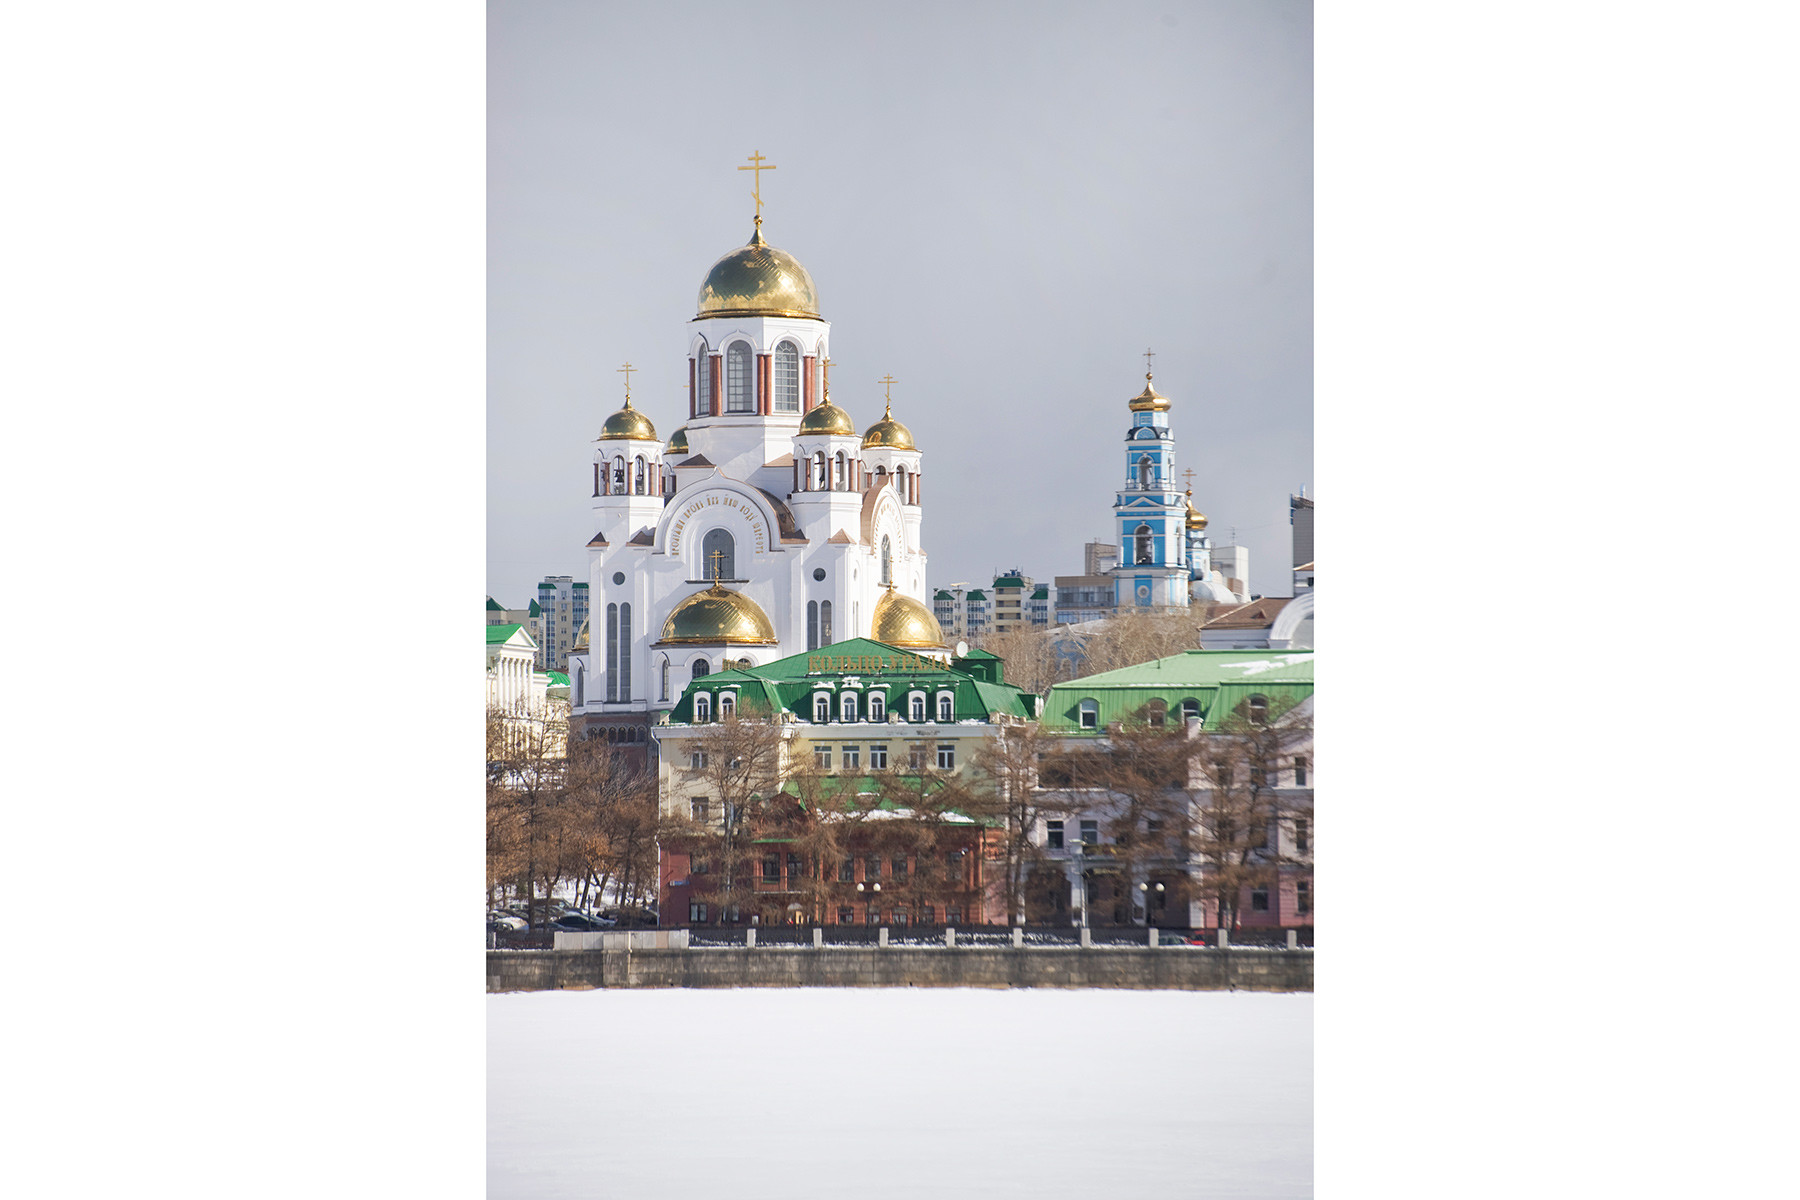 Church of All Saints Resplendent in the Russian Land, southwest view across City Pond. Background: Bell tower of Ascension Church. April 4, 2017.